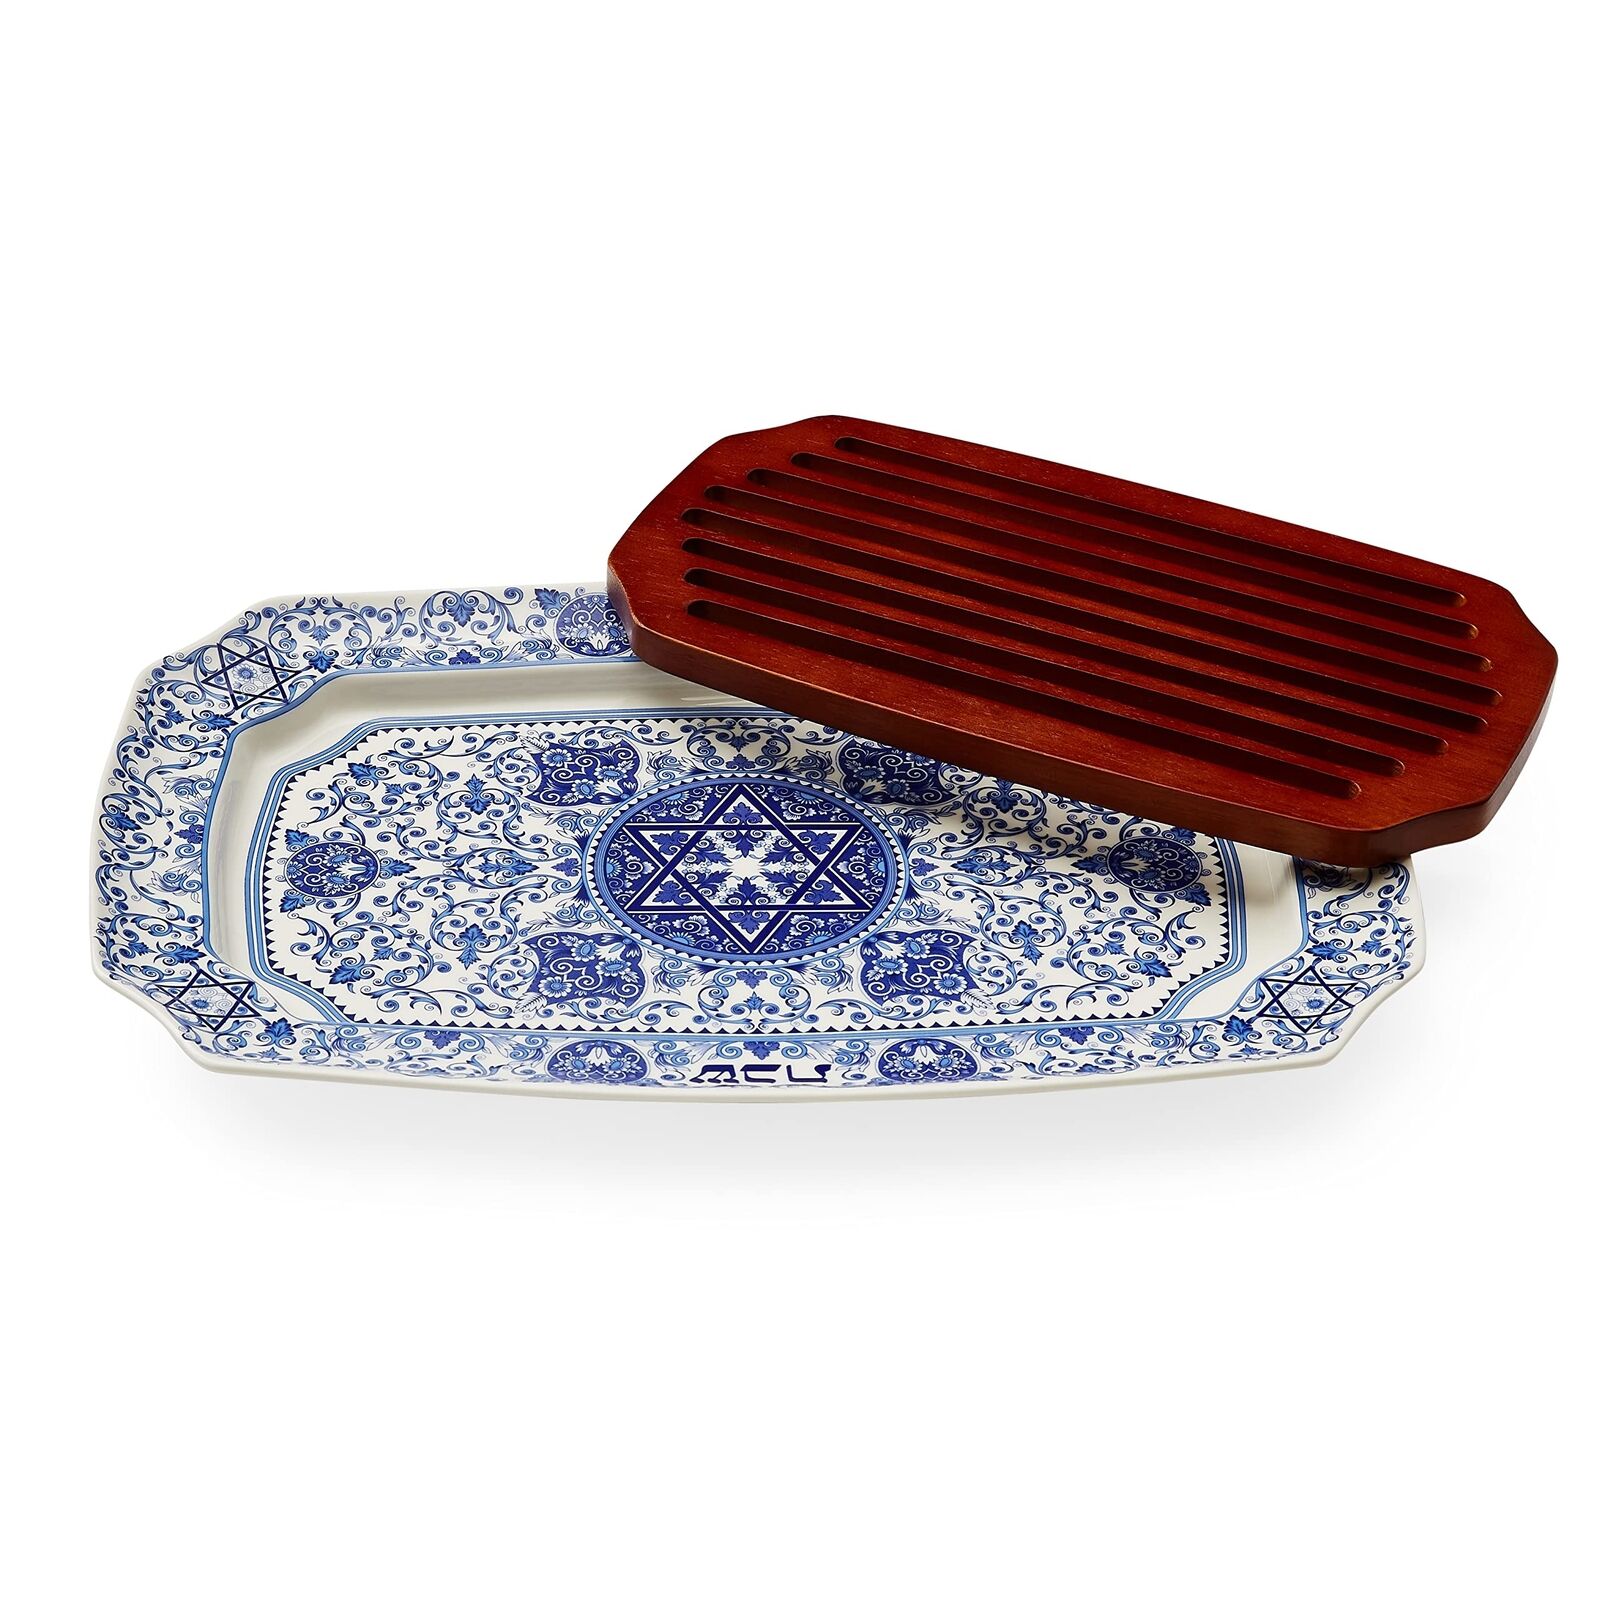 Spode Judaica Challah Tray with Wooden Insert | 17.5 Inch Large Bread Cutting...